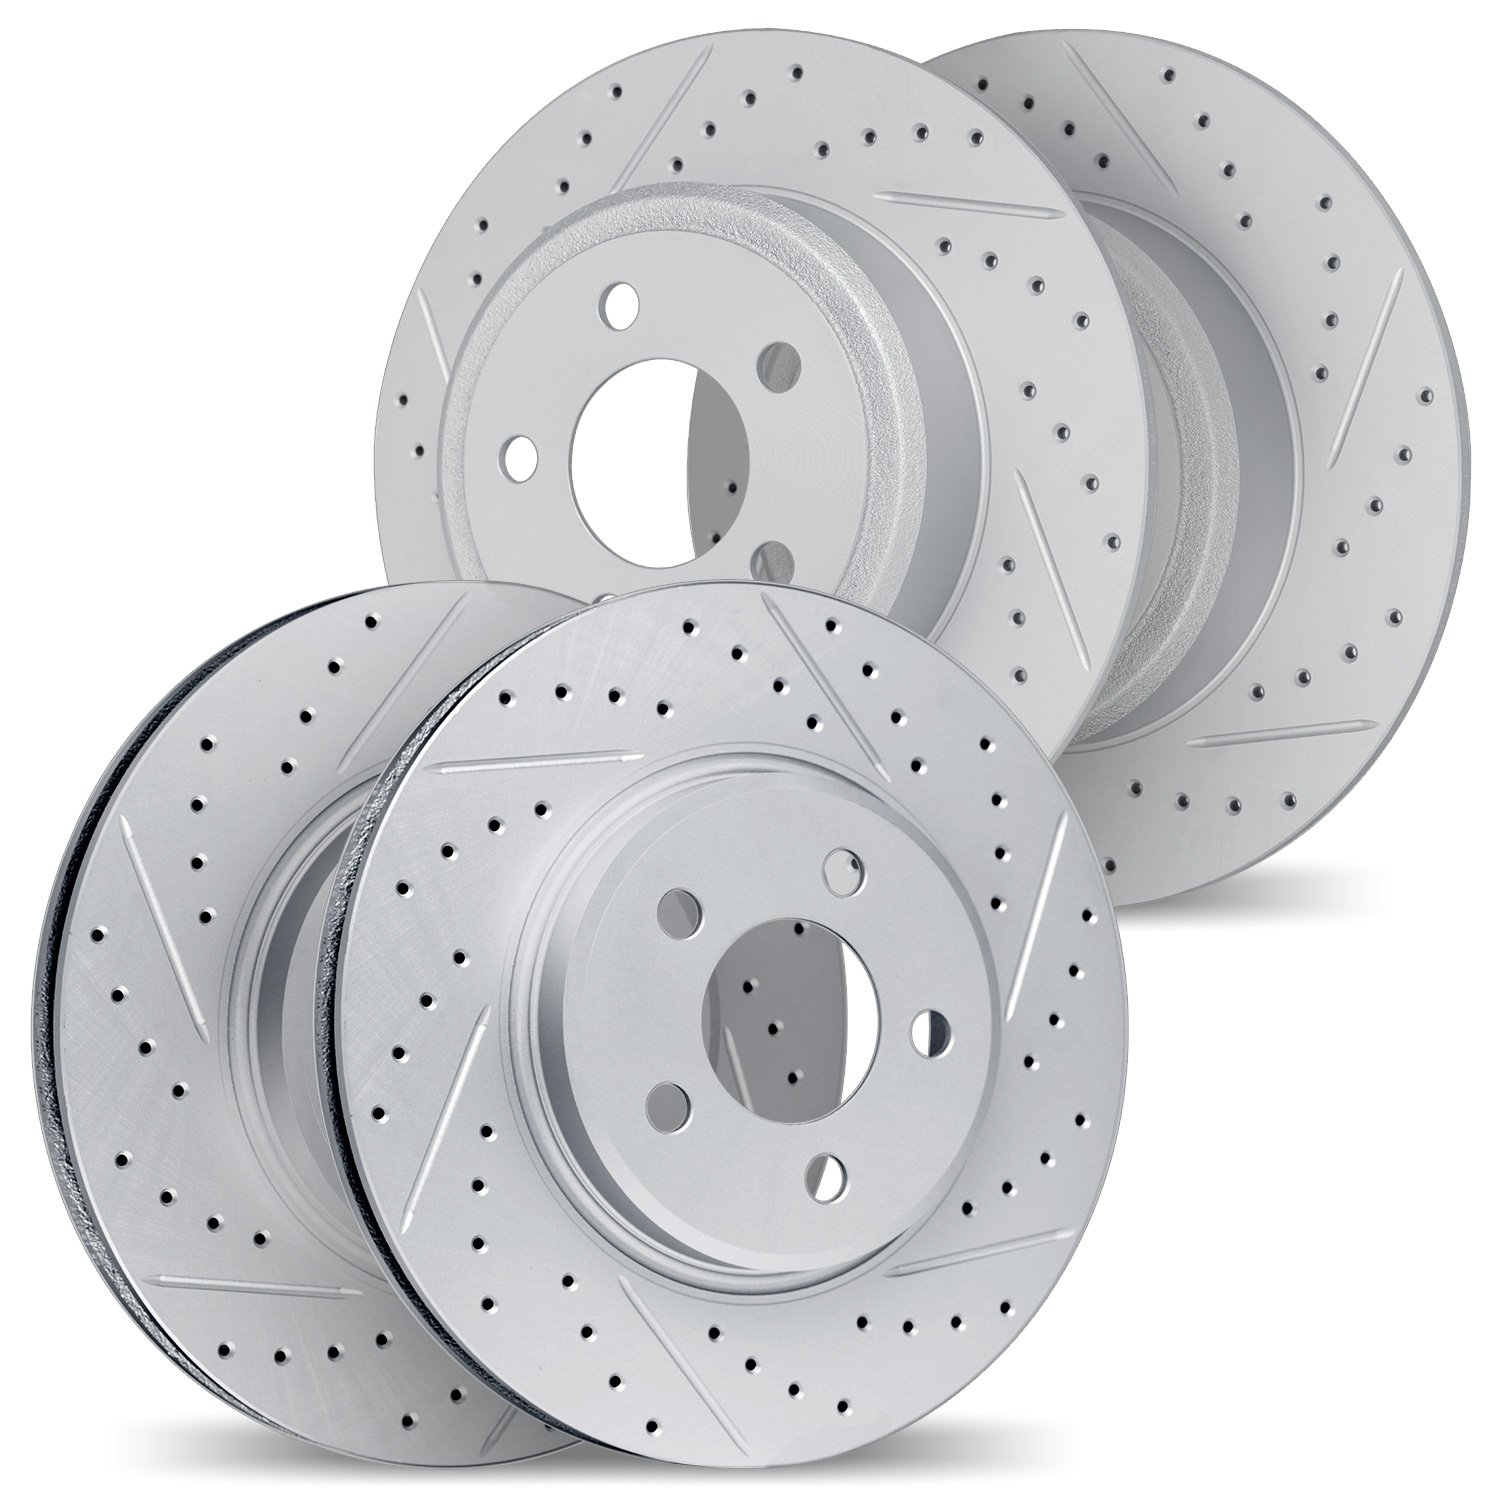 2004-46000 Geoperformance Drilled/Slotted Brake Rotors, 2014-2019 GM, Position: Front and Rear